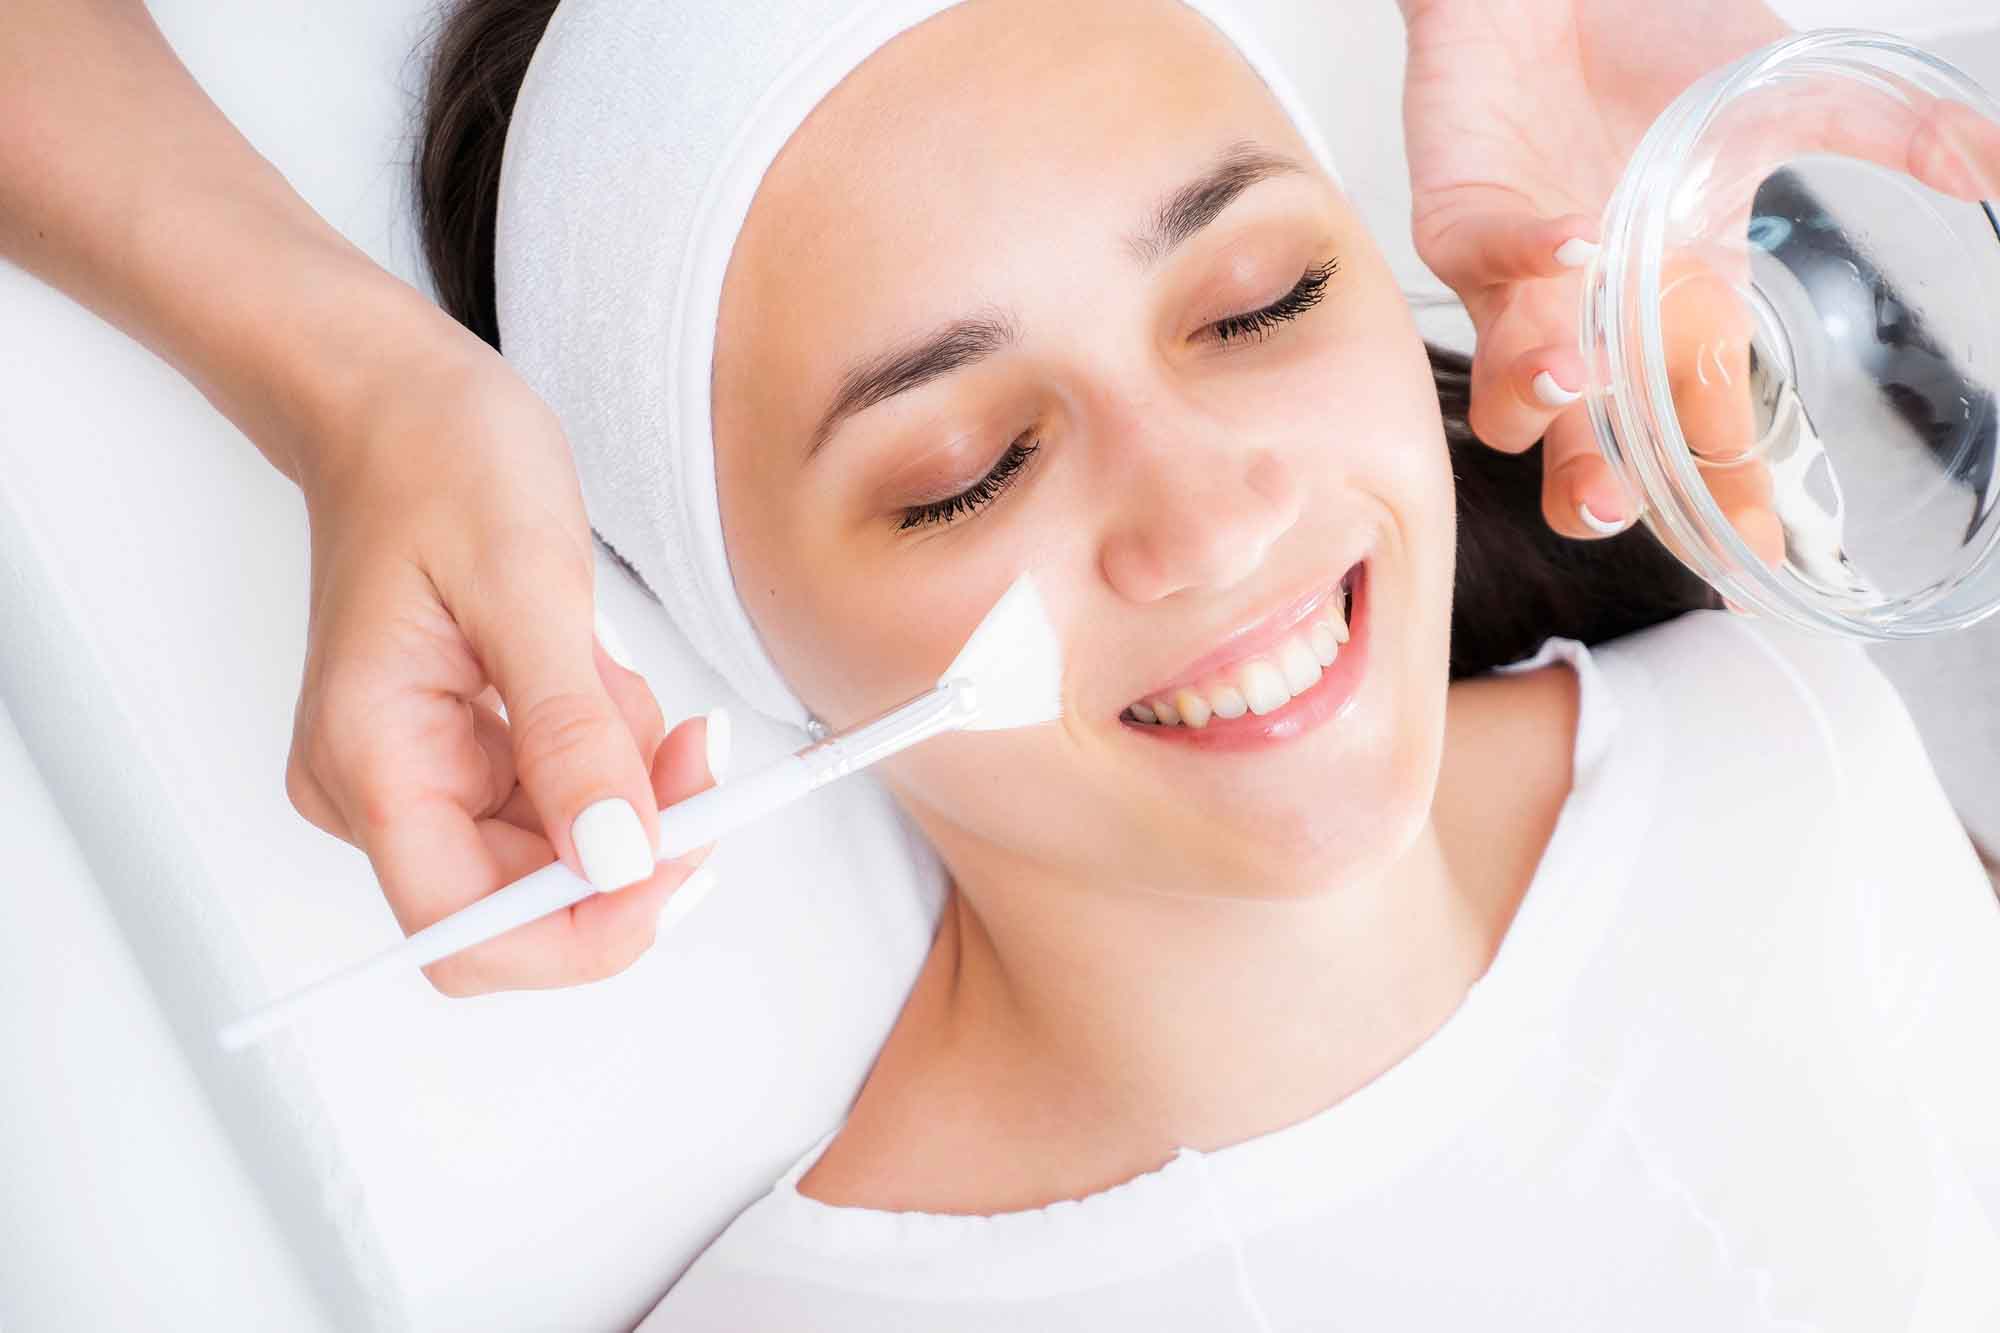 chemical peel facial provided in fort worth texas best services